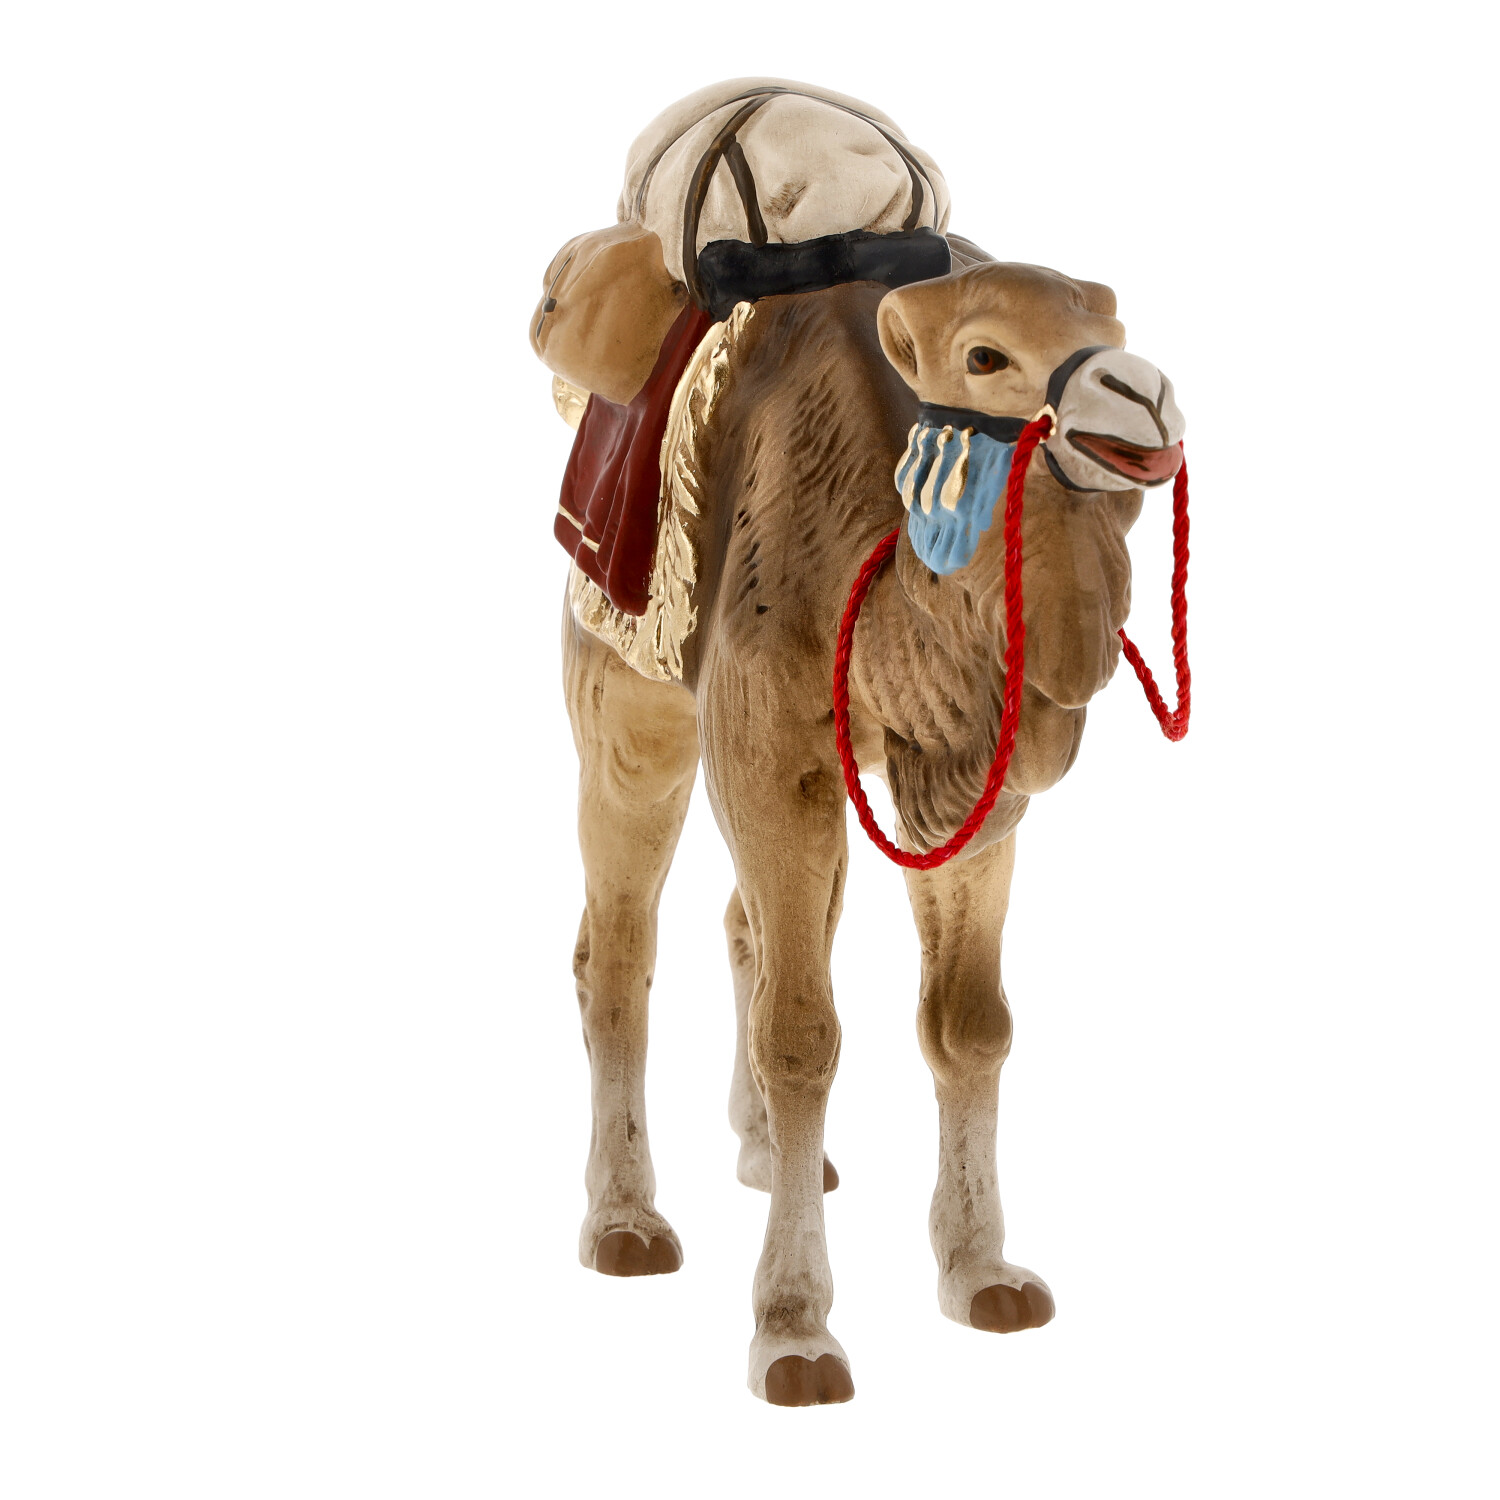 Camel with luggage - bactrian camel- Marolin Nativity figure - made in Germany